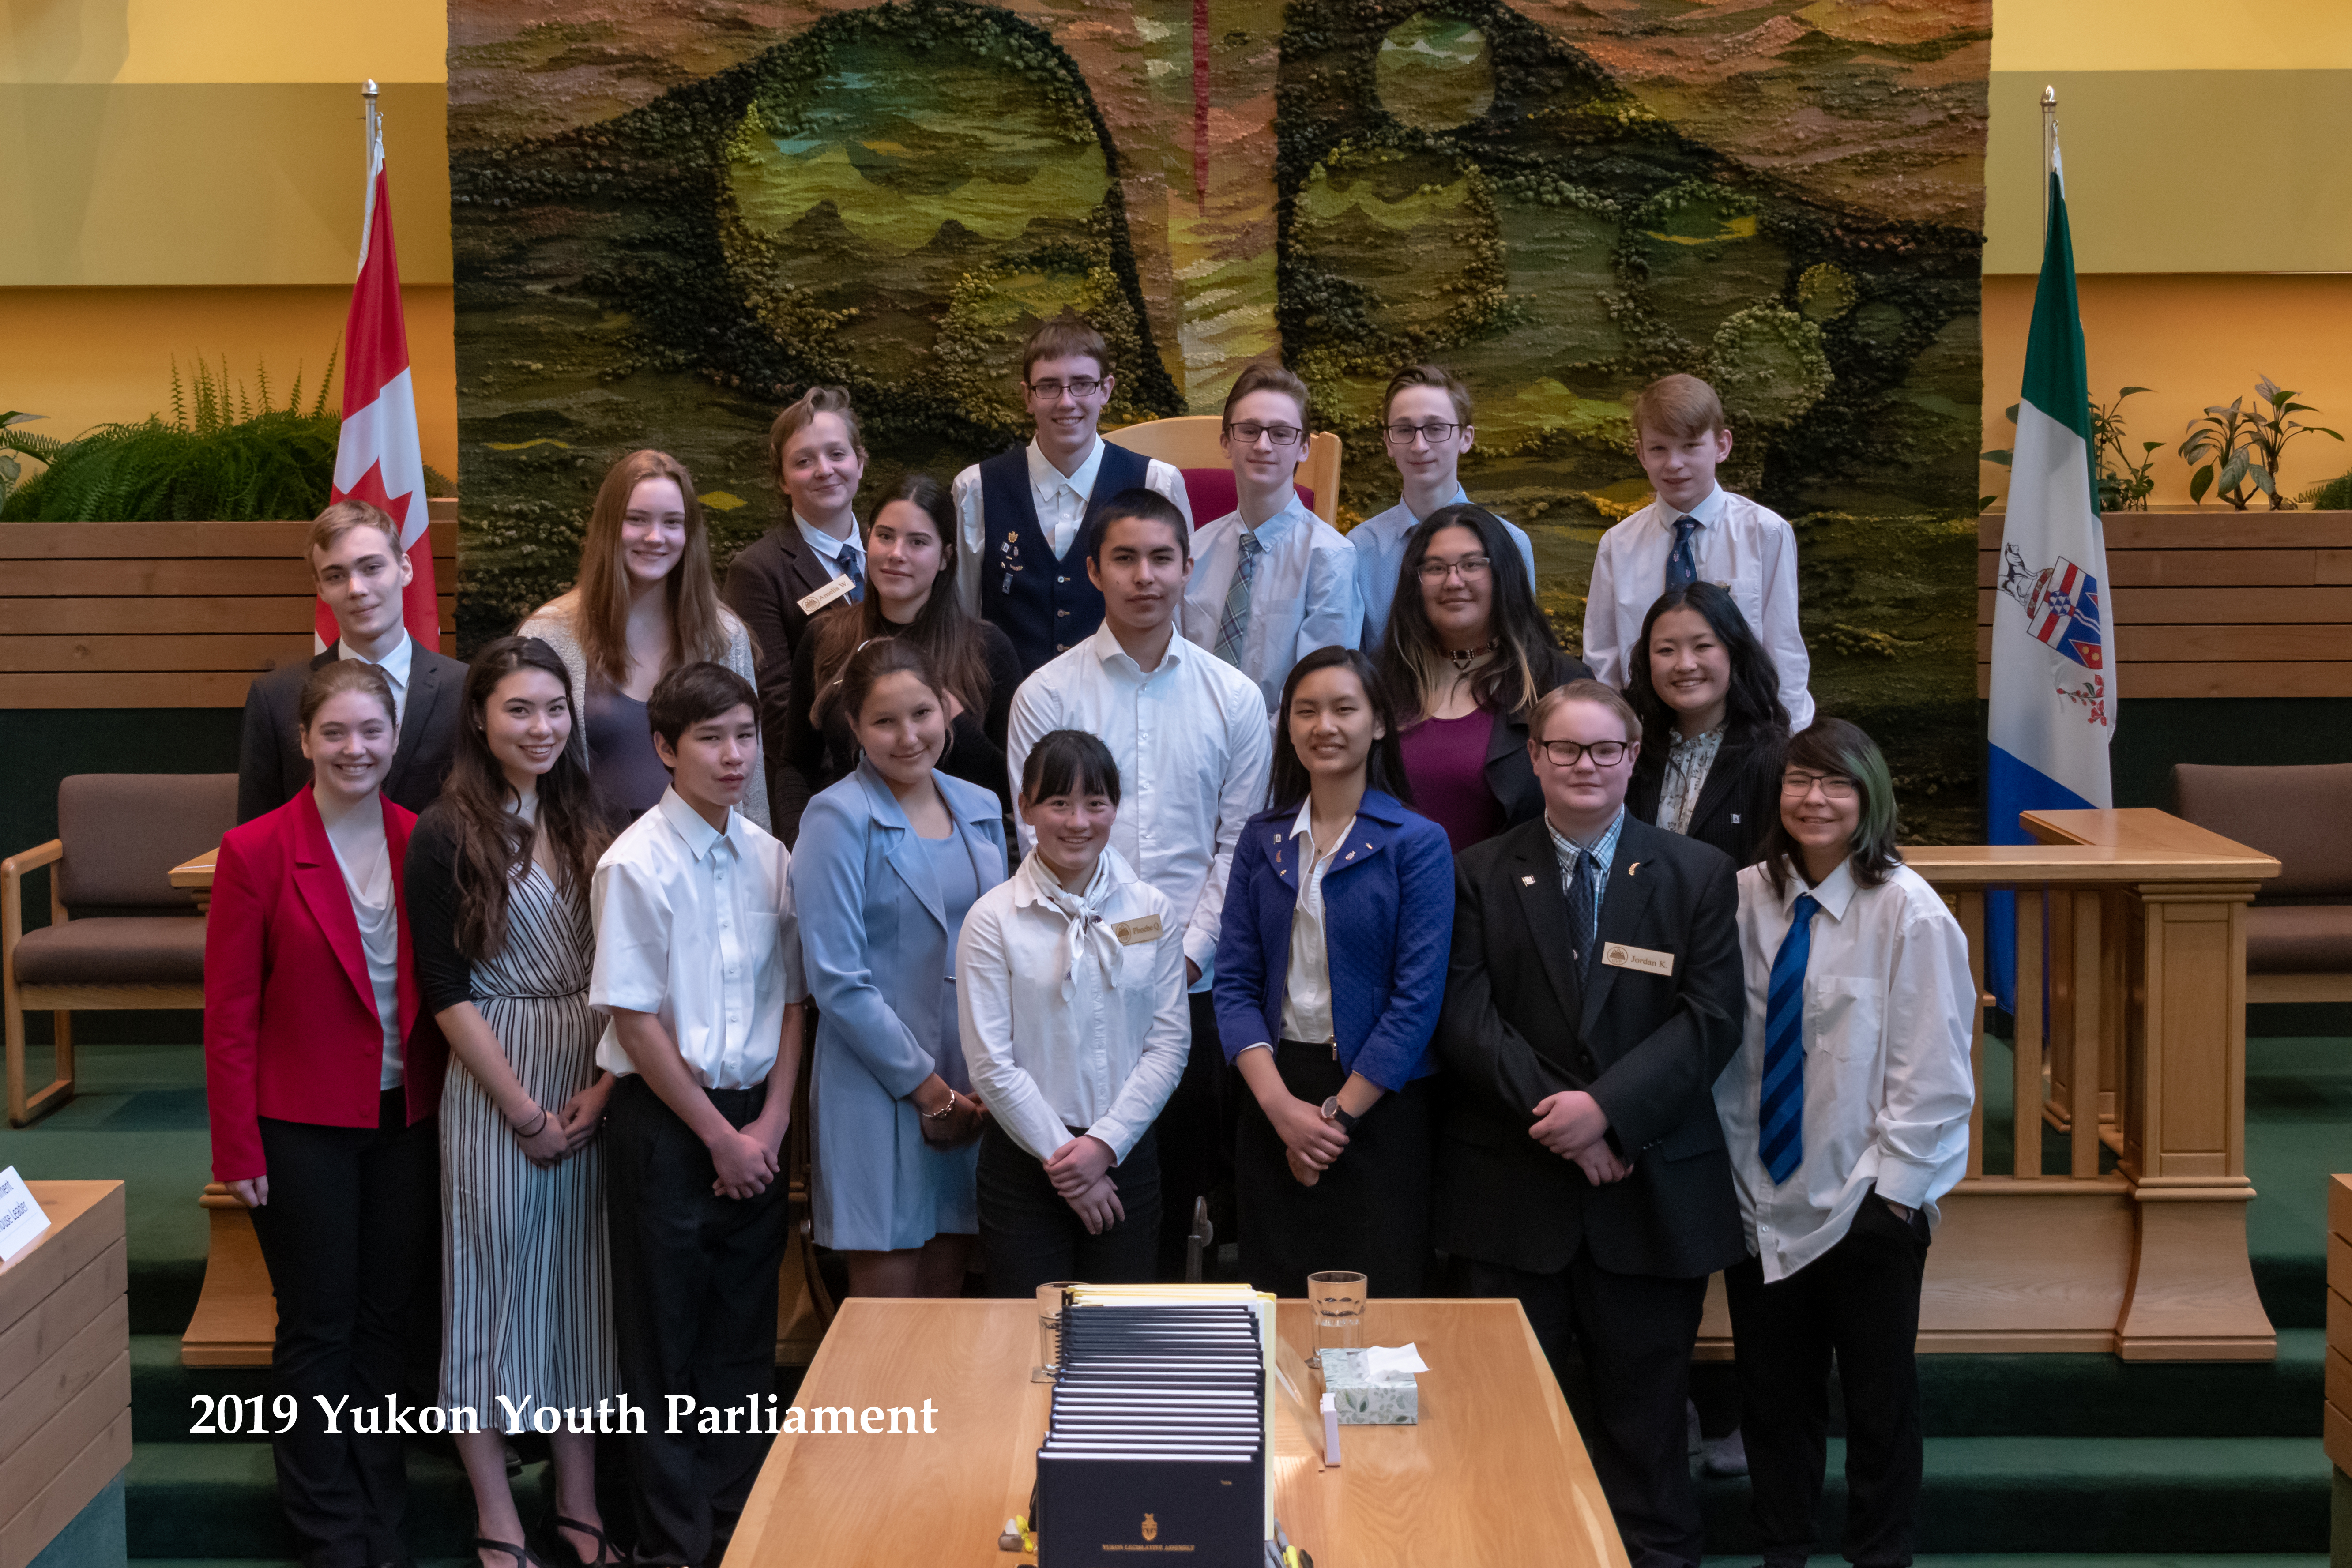 2019 Youth Parliament Group Photo